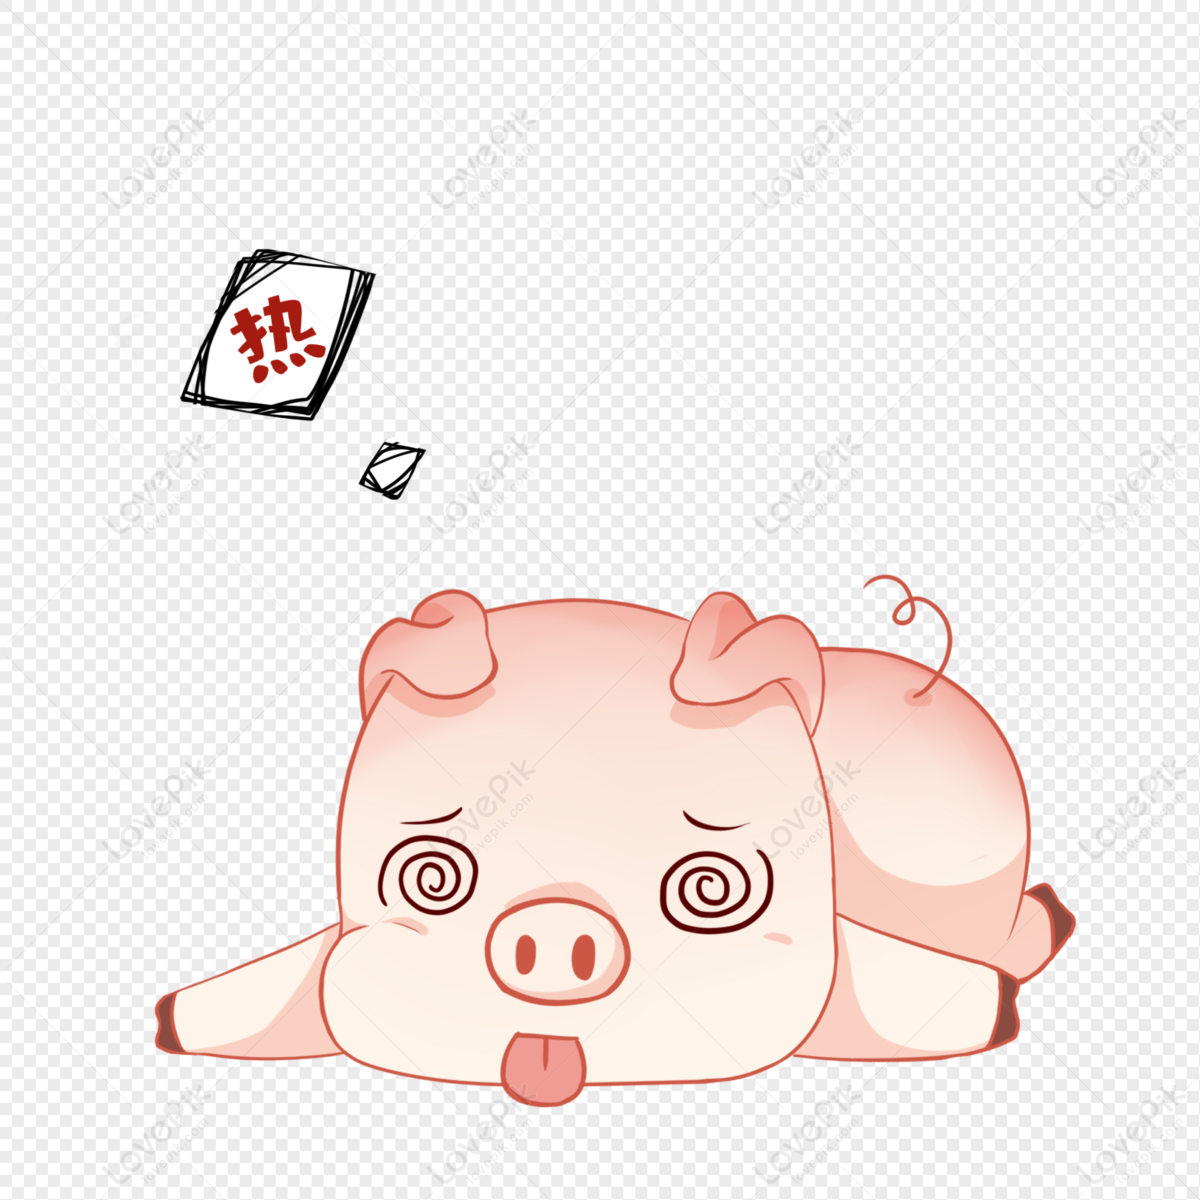 Hot Halo Cartoon Pig PNG Hd Transparent Image And Clipart Image For Free  Download - Lovepik | 401419244